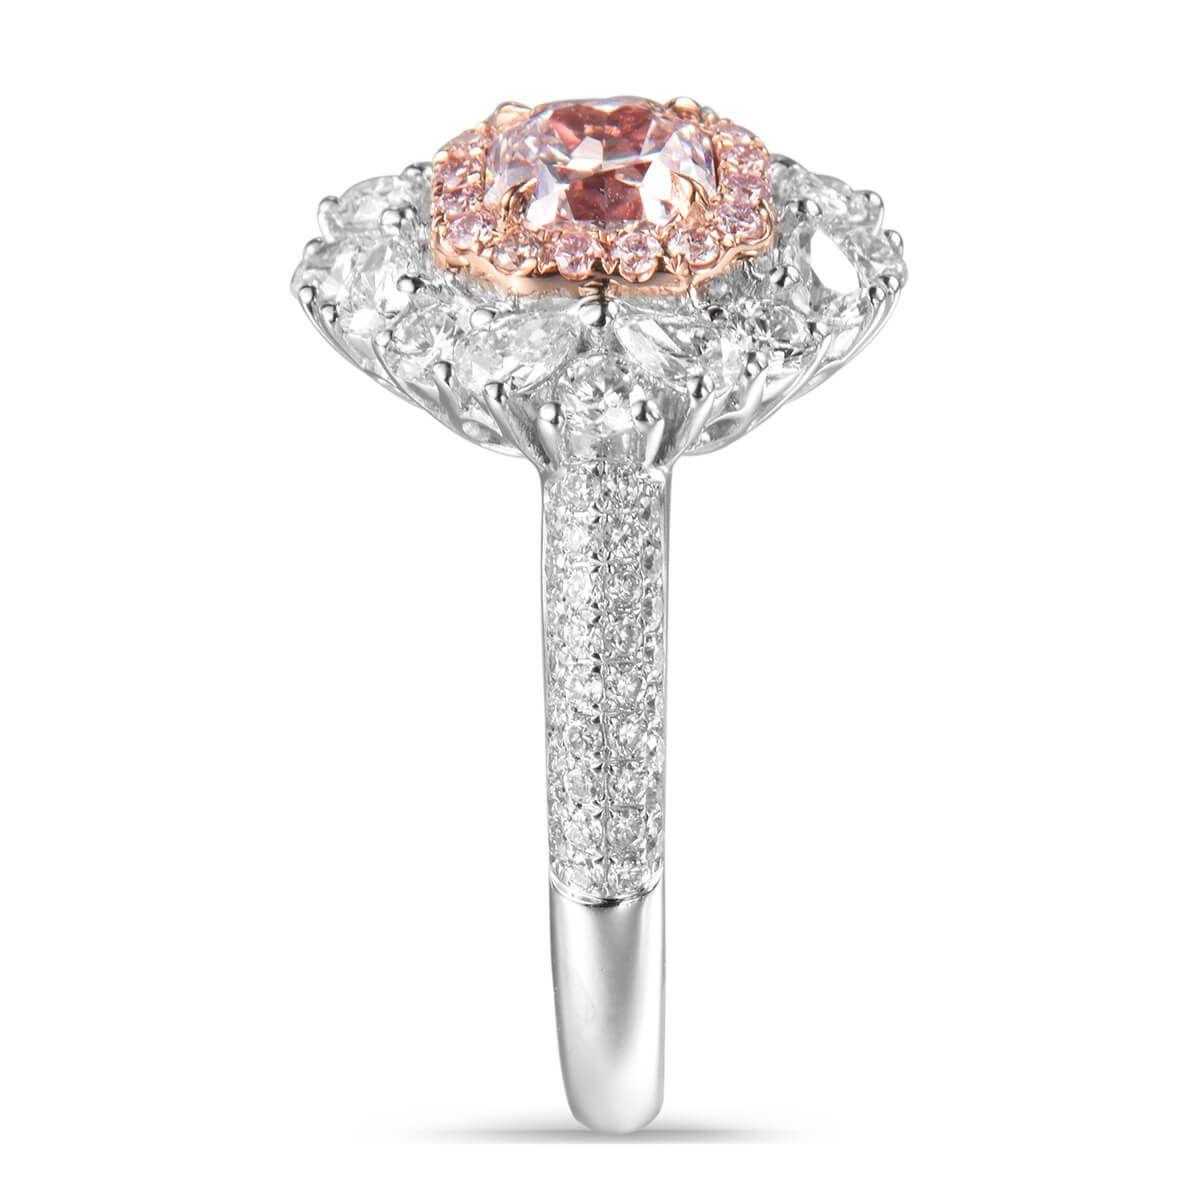 Faint Pink Diamond Ring, 2.78 Ct. TW, Radiant shape, GIA Certified, 2175042113